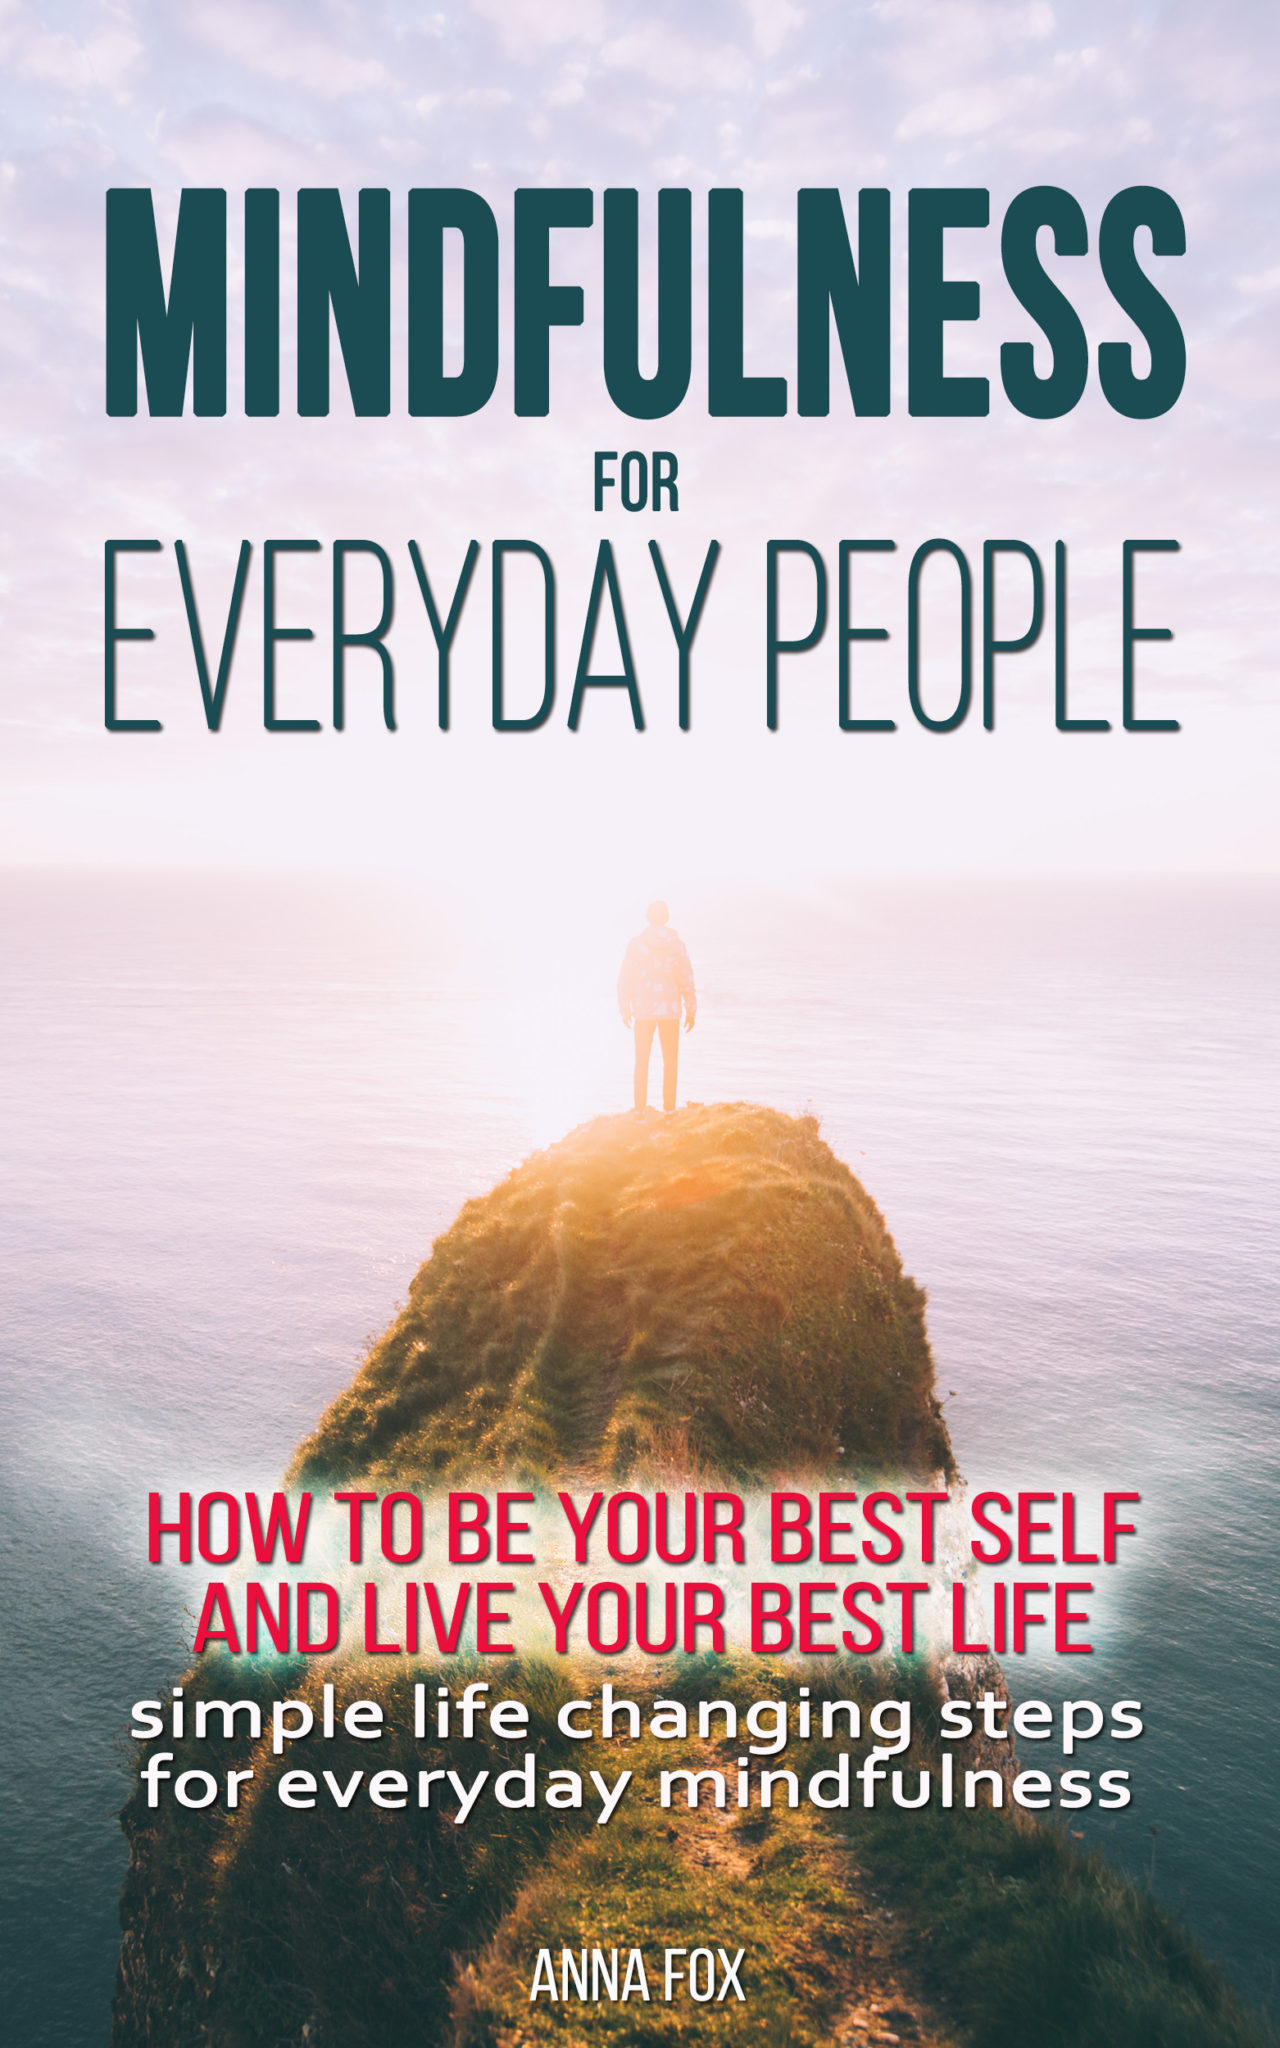 FREE: Mindfulness for everyday people: HOW TO BE YOUR BEST SELF AND LIVE YOUR BEST LIFE – Simple life changing steps for everyday mindfulness by Anna Fox